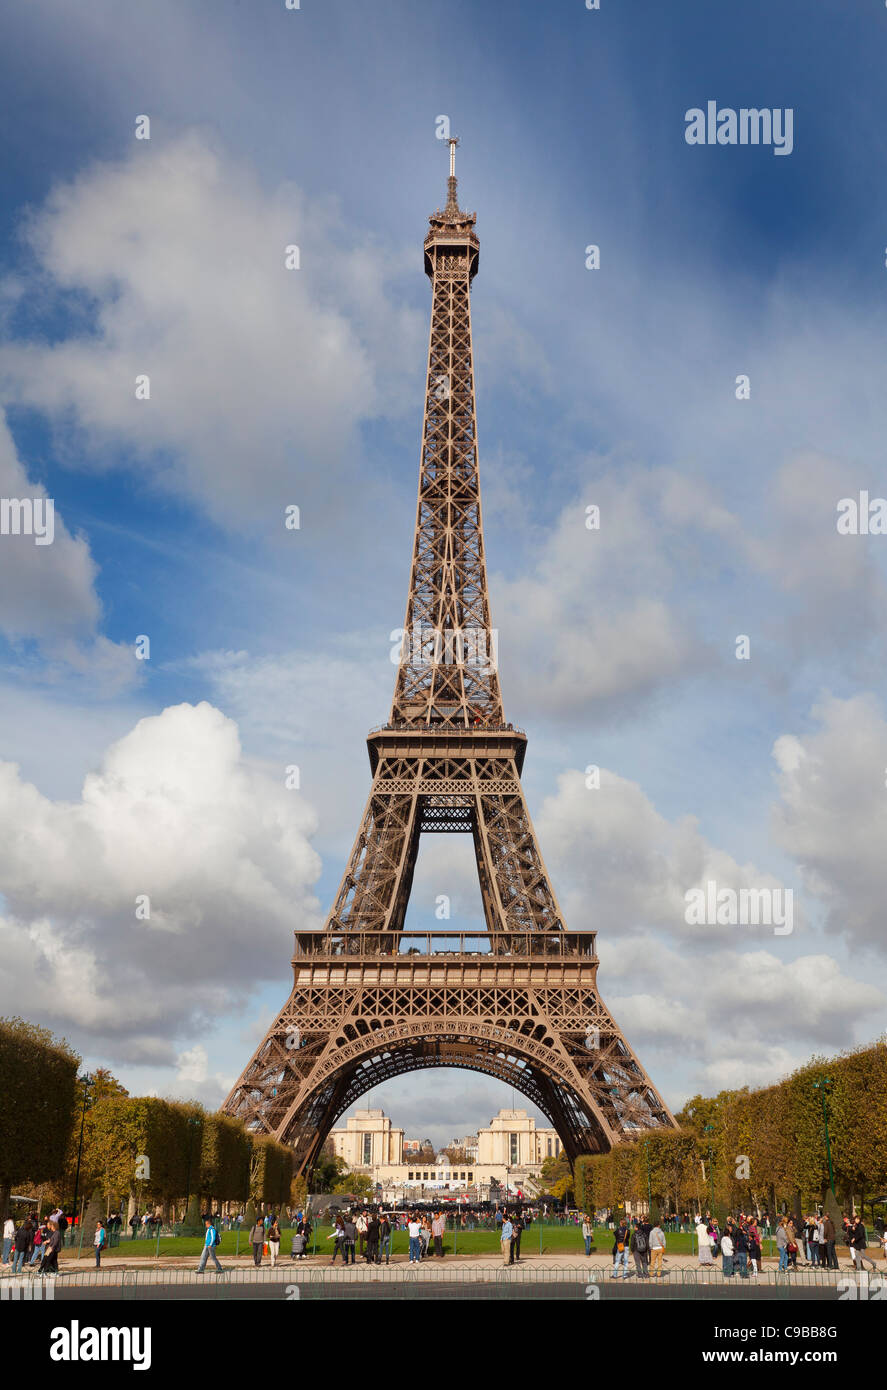 The Eiffel tower, viewed from the South, Paris, France. Bright sunny day blue sky. Stock Photo